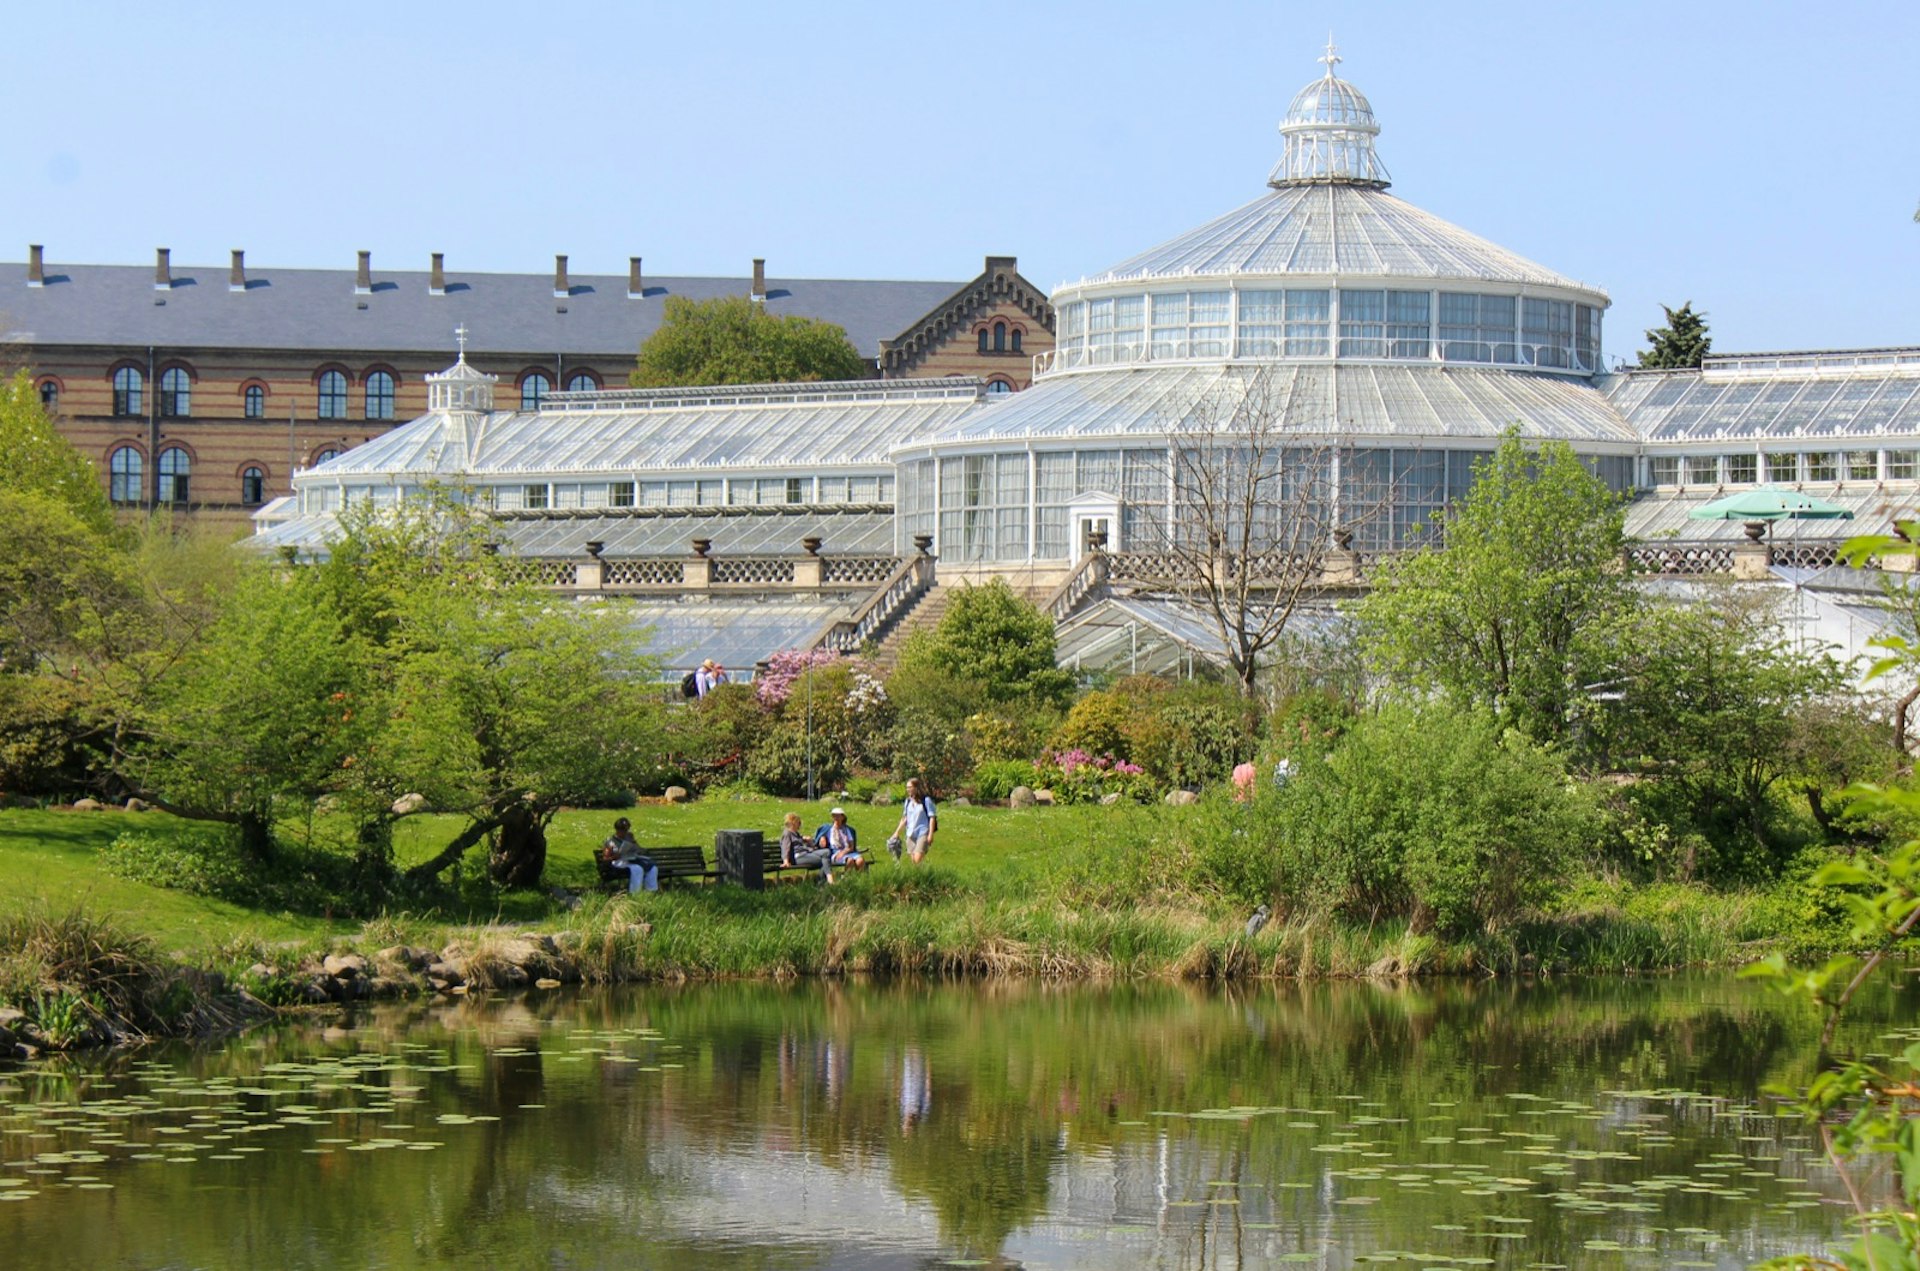 A group of people sit on a park bench in front of a small lake surrounded by trees and high grass in the Copenhagen Botanical Garden. In the background is a large glass green house